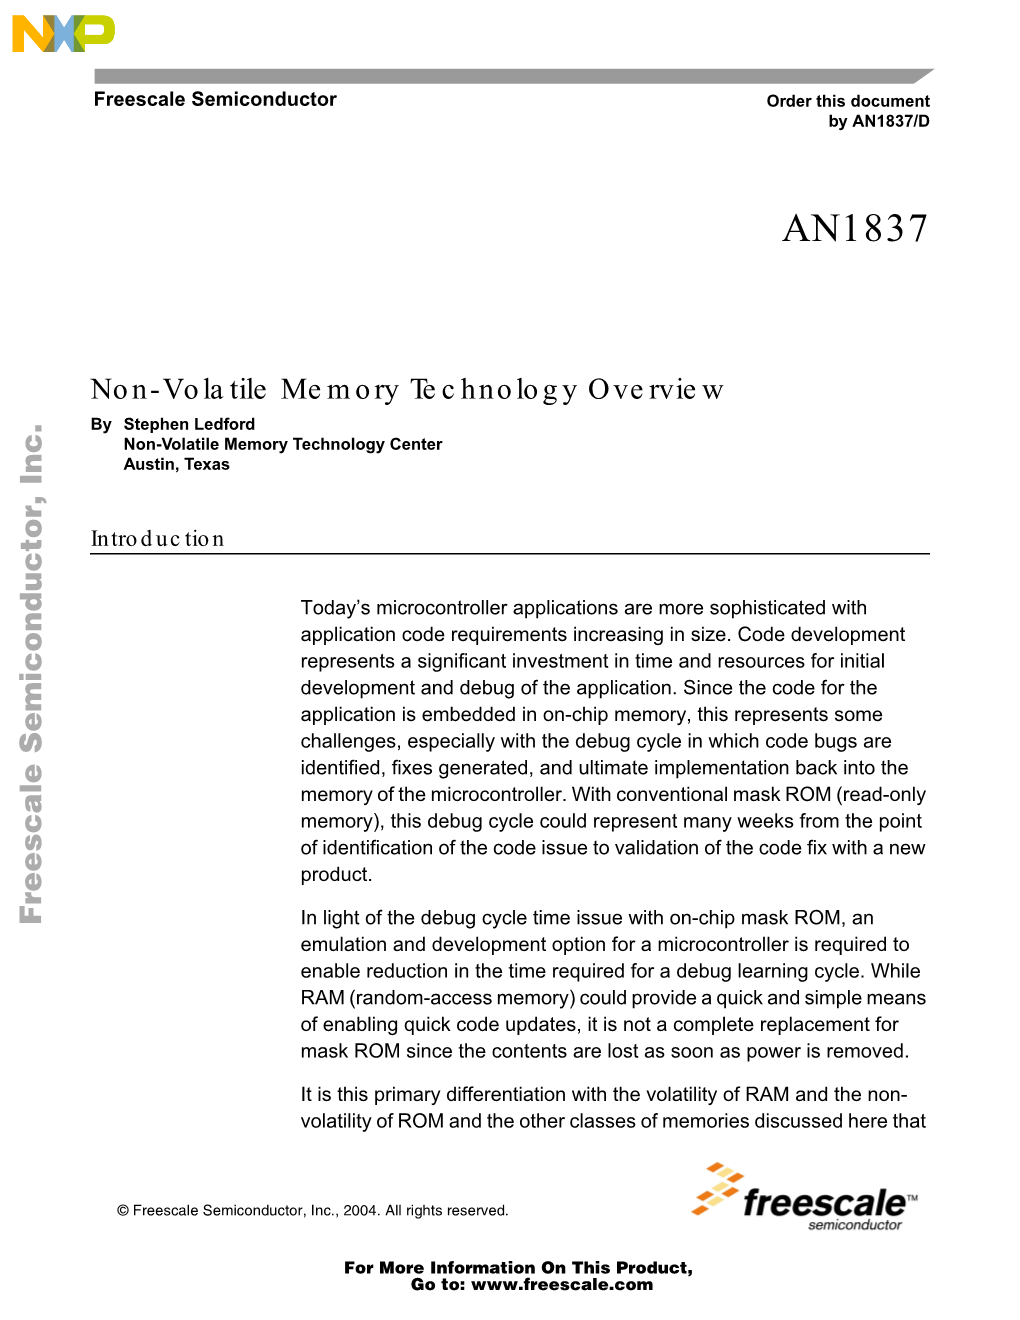 Non-Volatile Memory Technology Overview